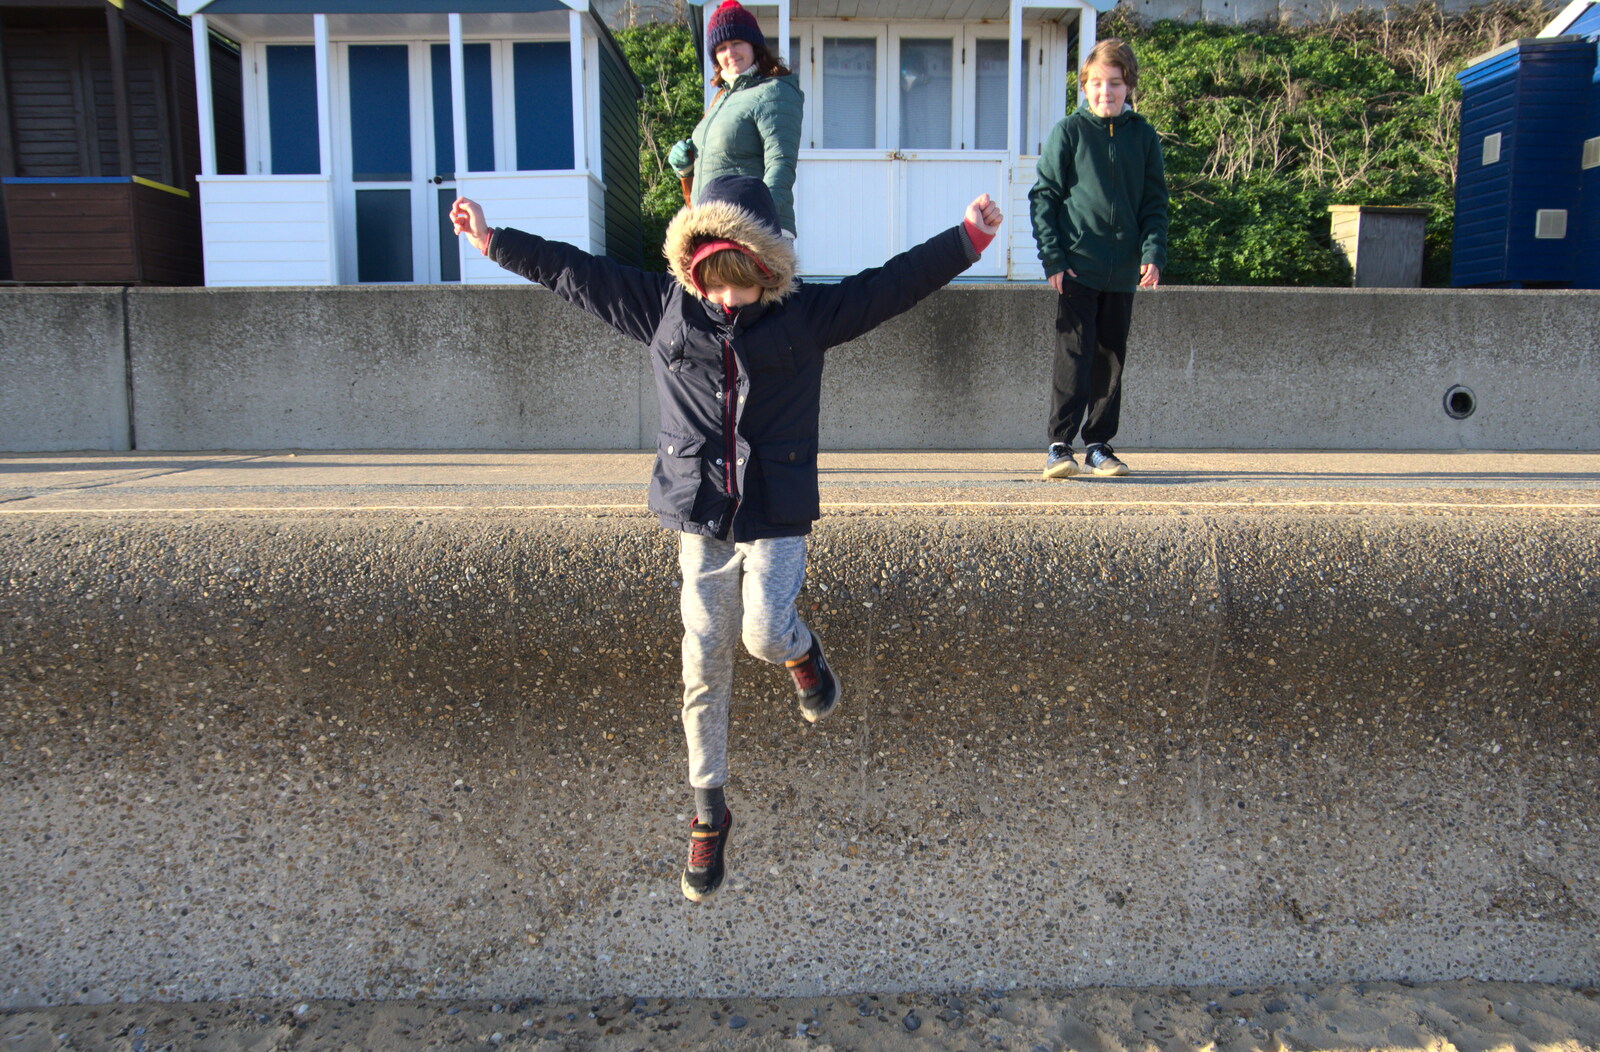 Harry hurls himself off the wall from A Return to the Beach, Southwold, Suffolk - 20th December 2020